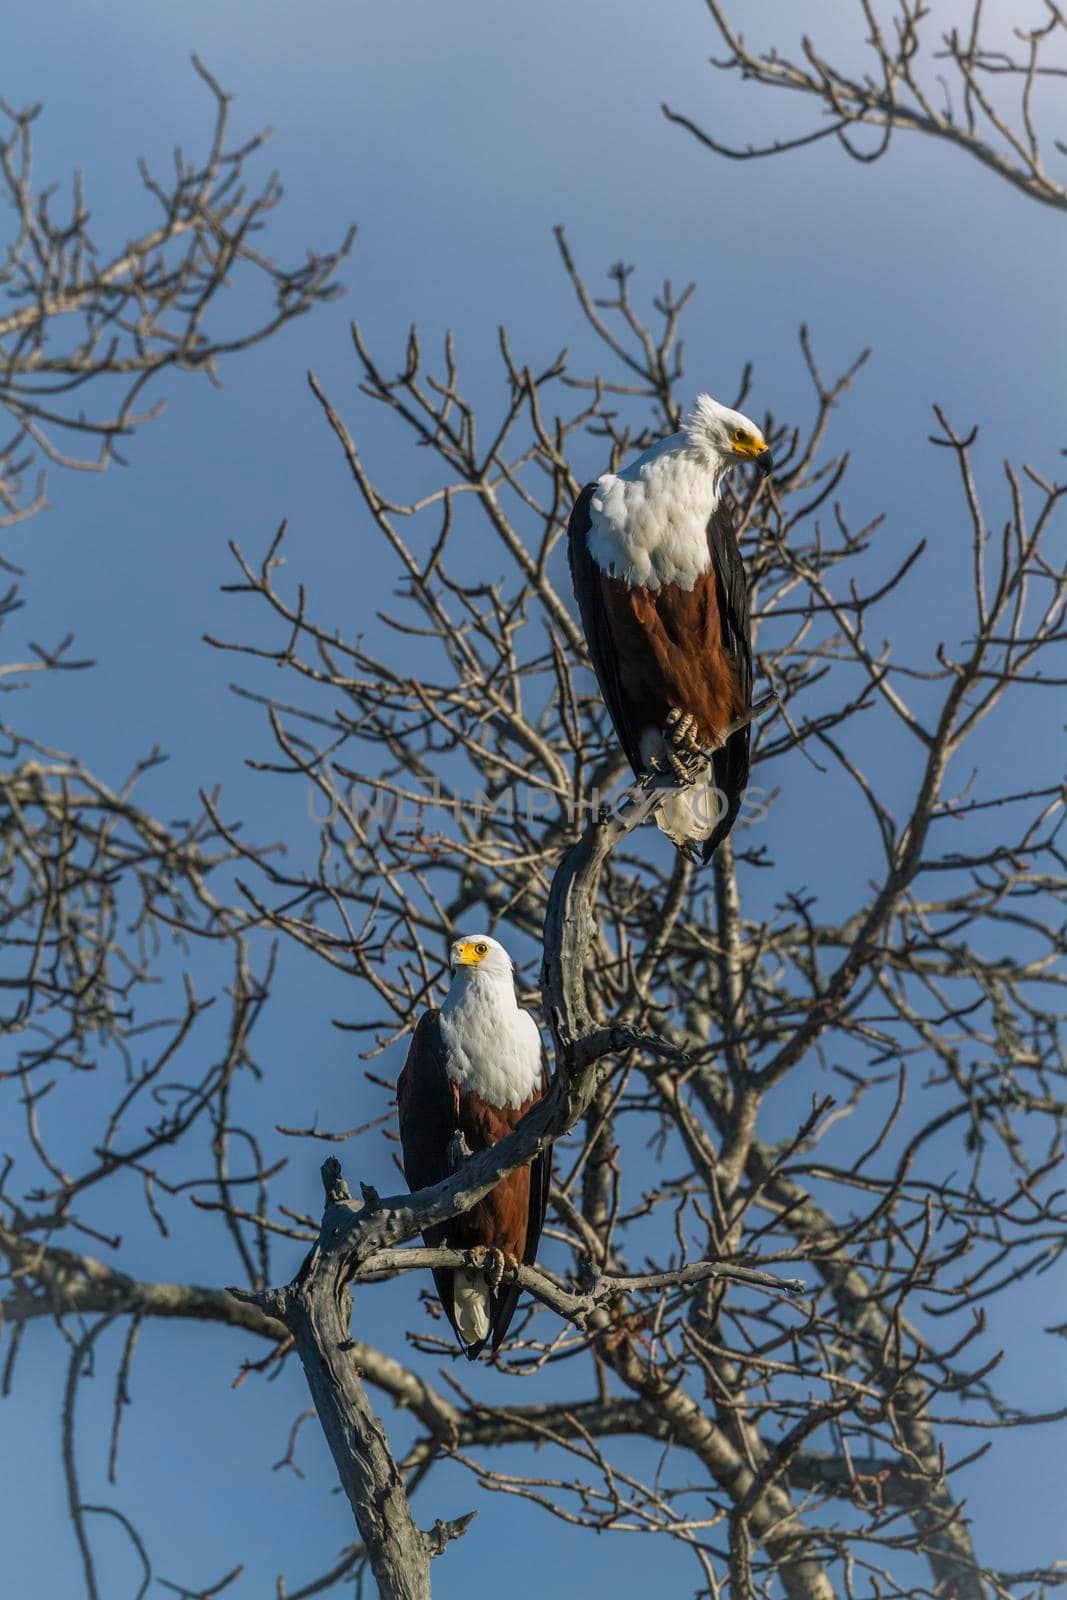 African fish eagle in Kruger National park, South Africa ; Specie Haliaeetus vocifer family of Accipitridae